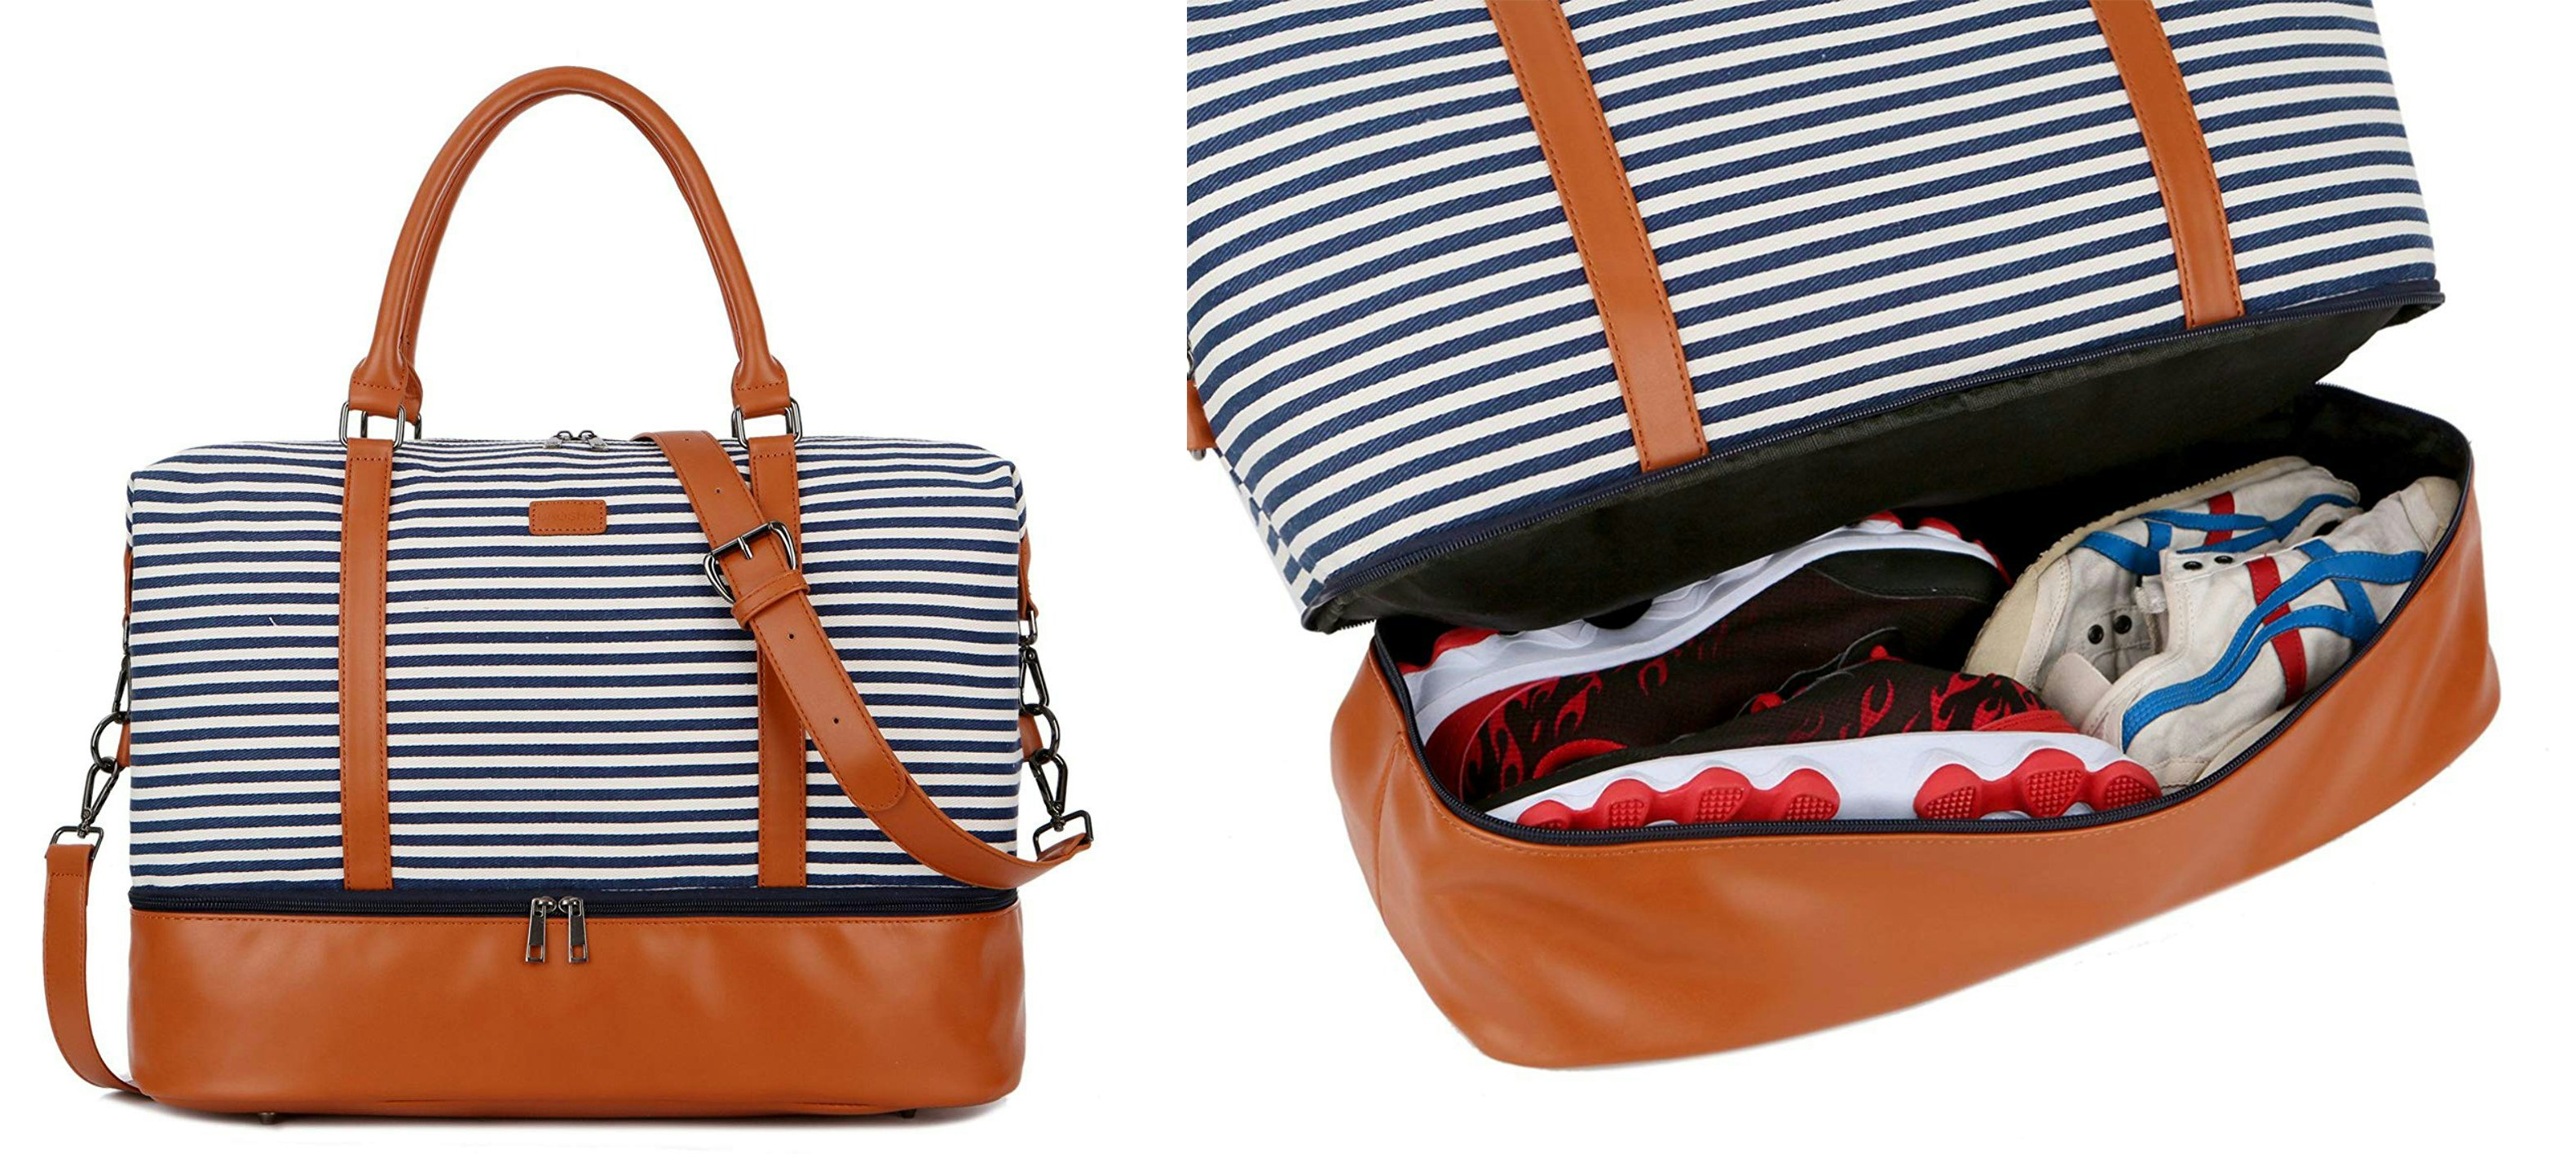 large luggage tote bag with compartments